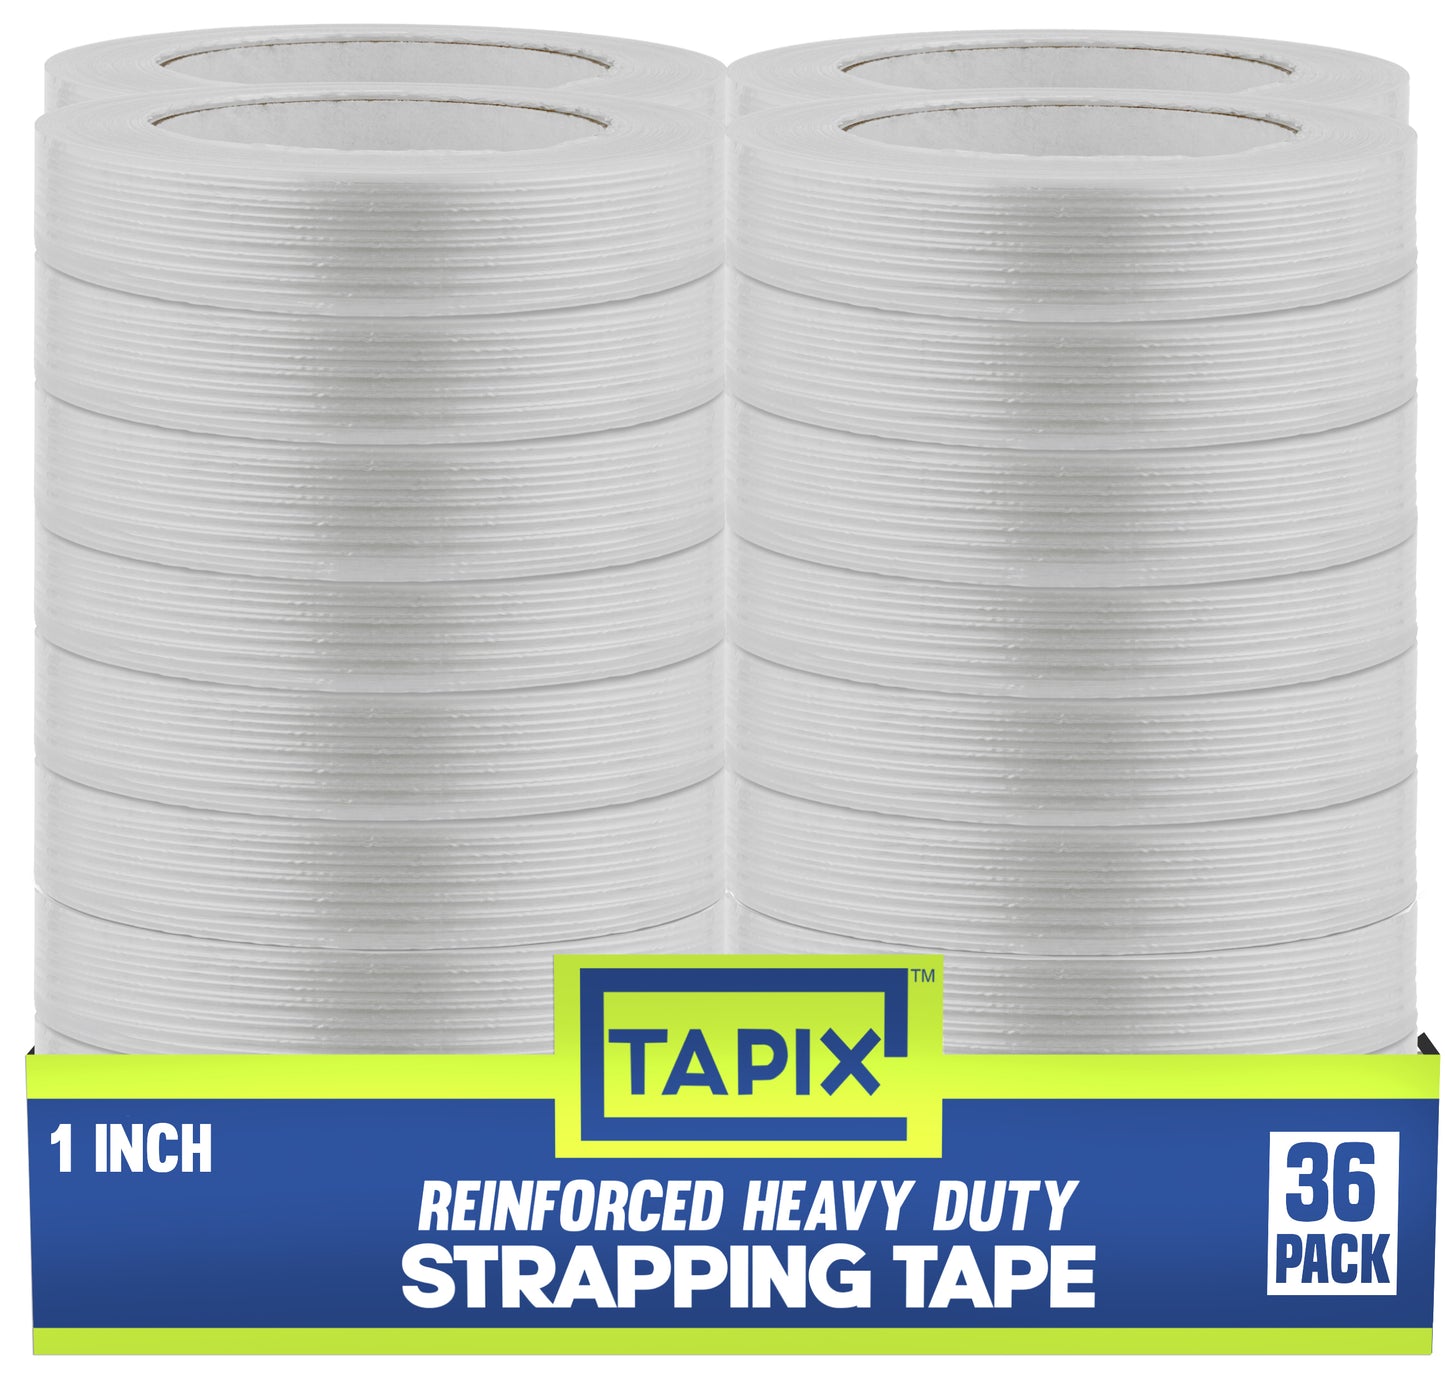 Strapping Tape 1 inch x 60 yds (36 Pack)